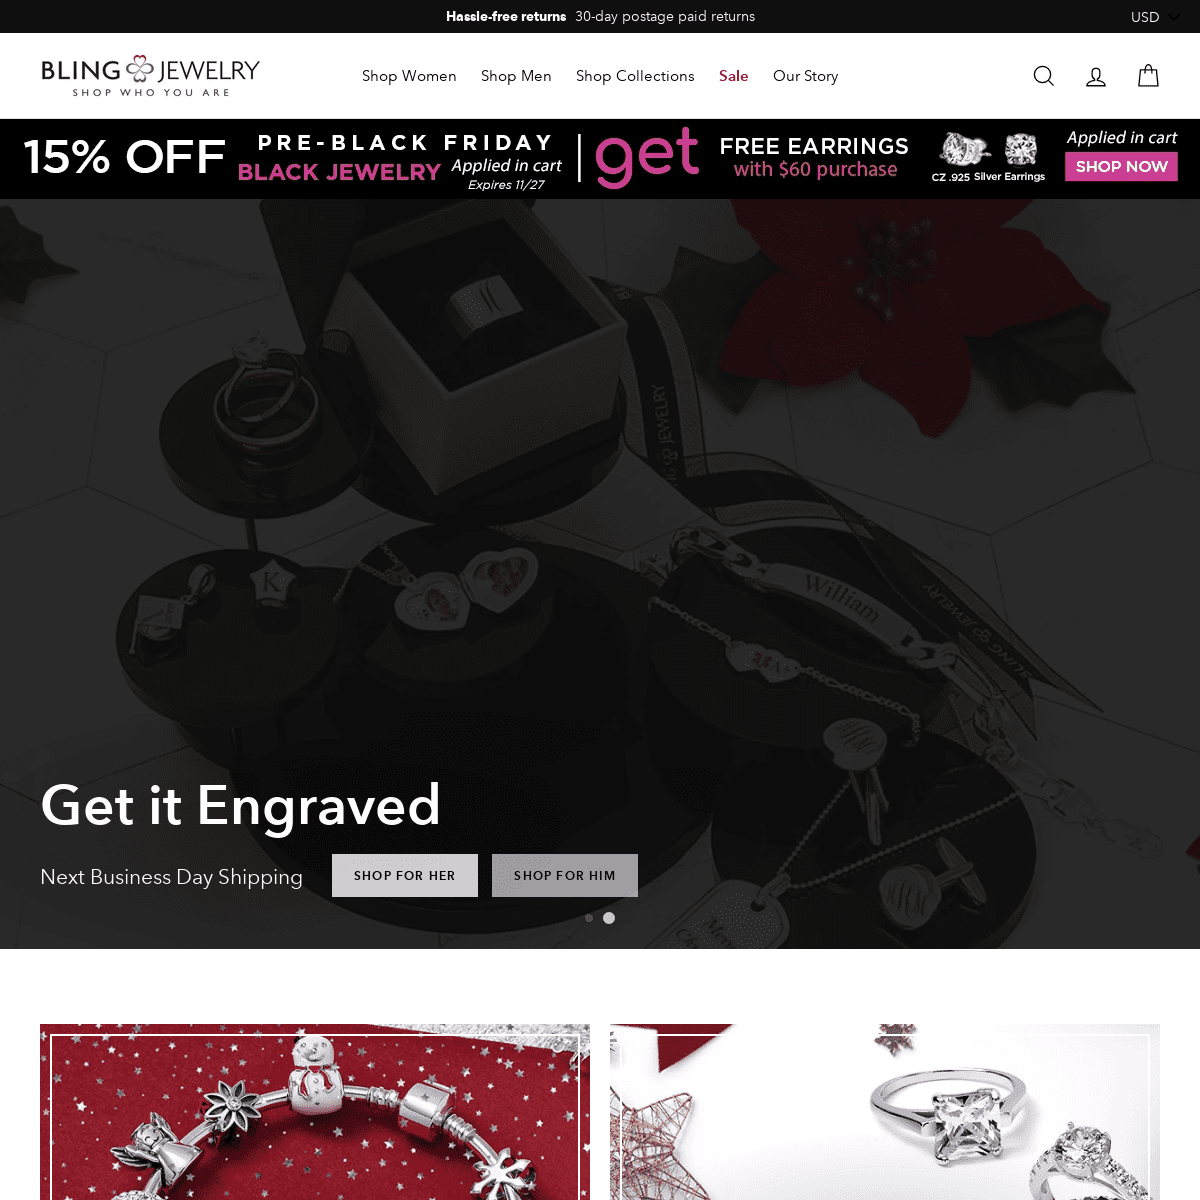 A complete backup of blingjewelry.com